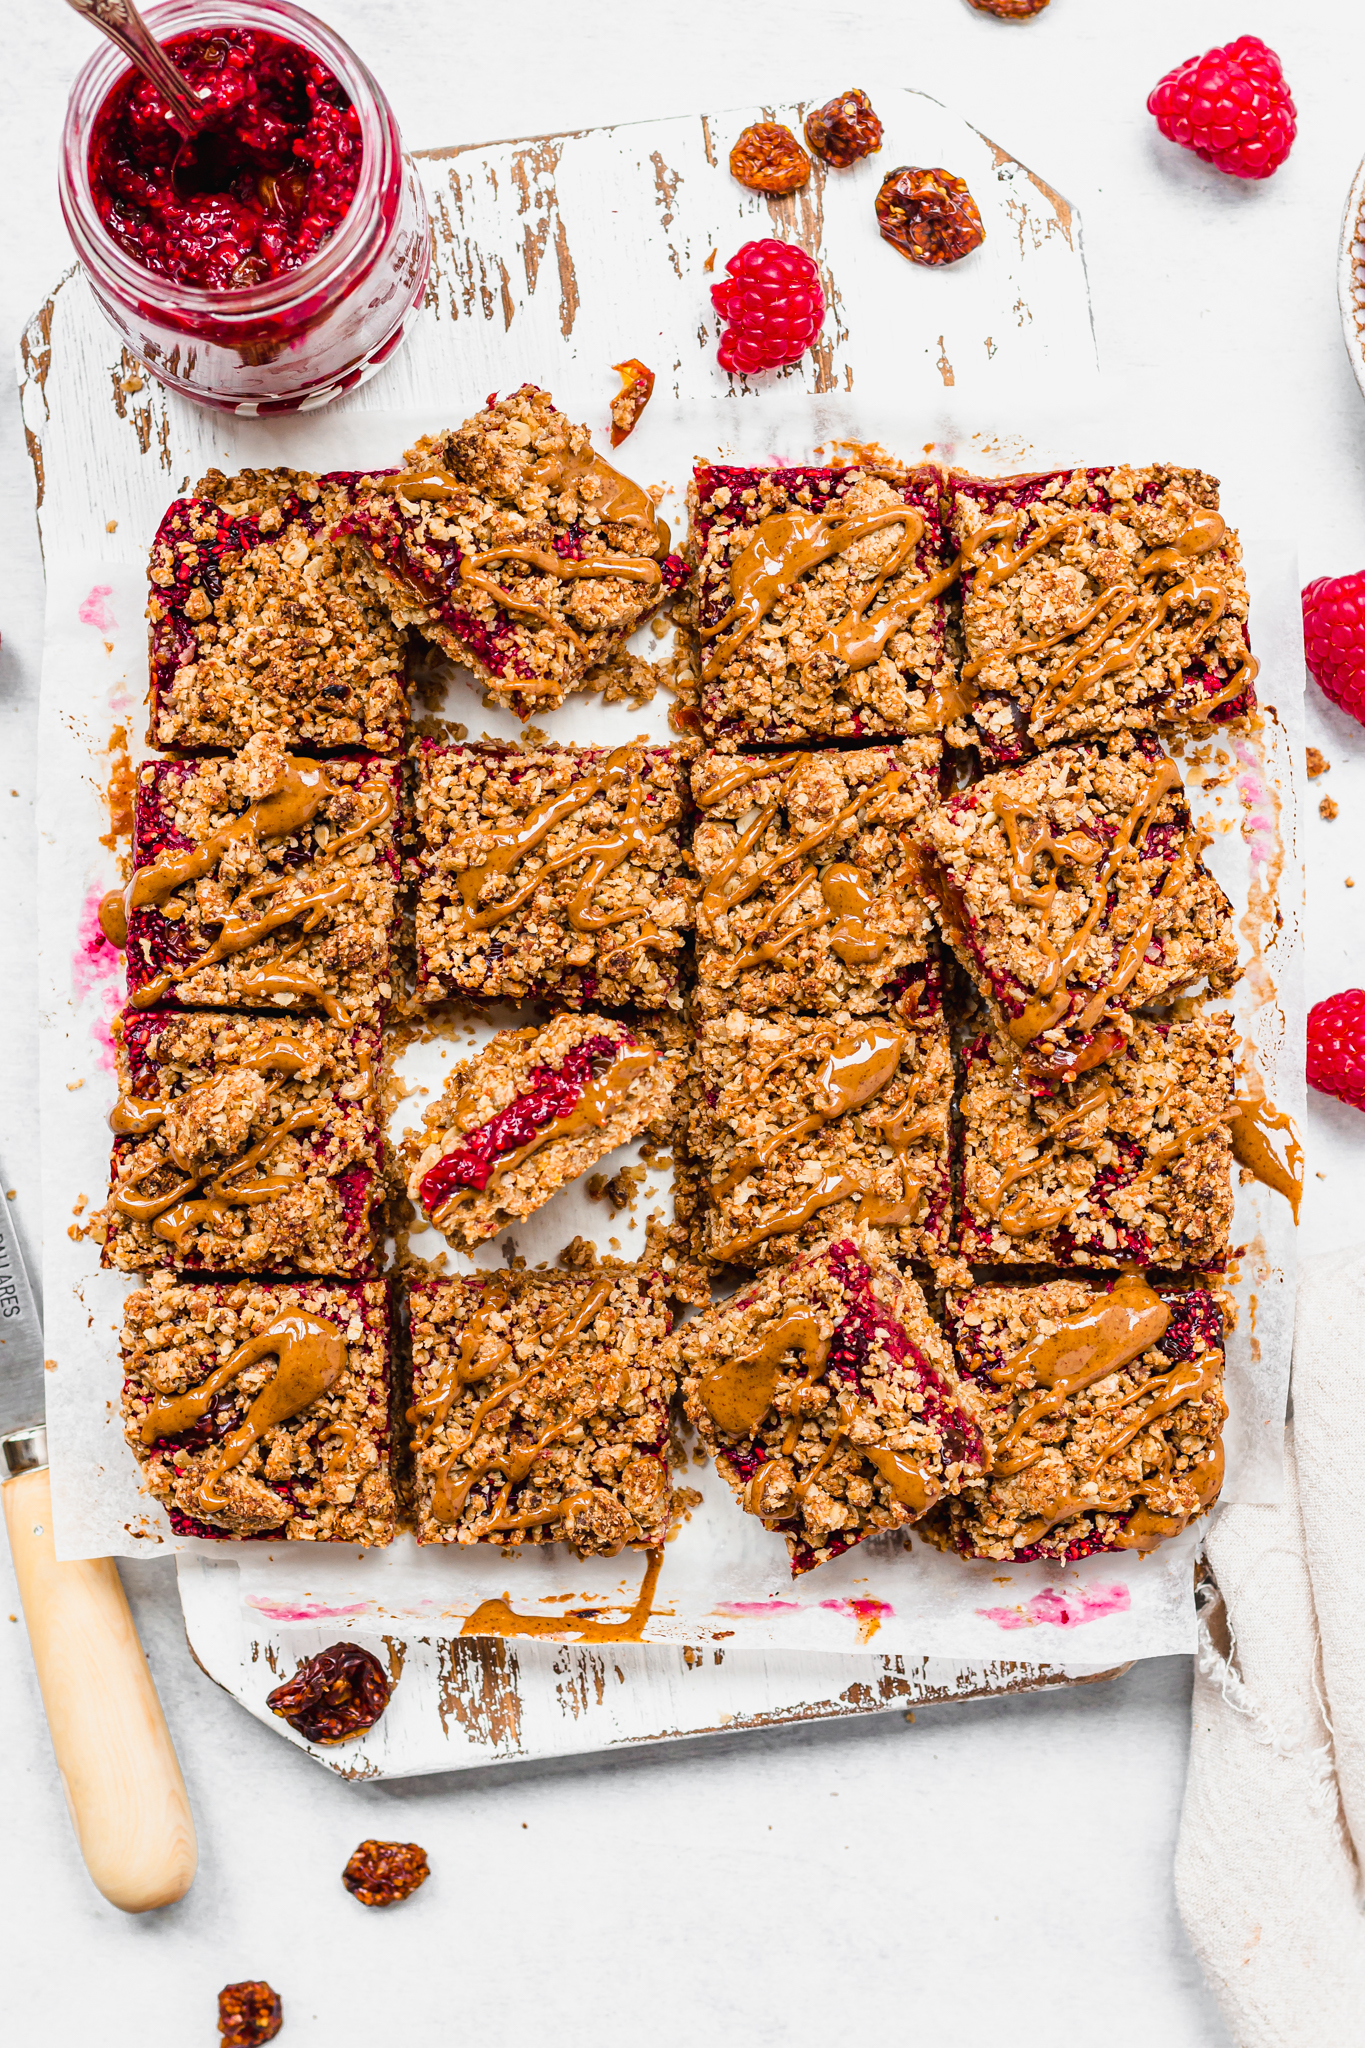 Almond Butter and Raspberry Crumble Bars